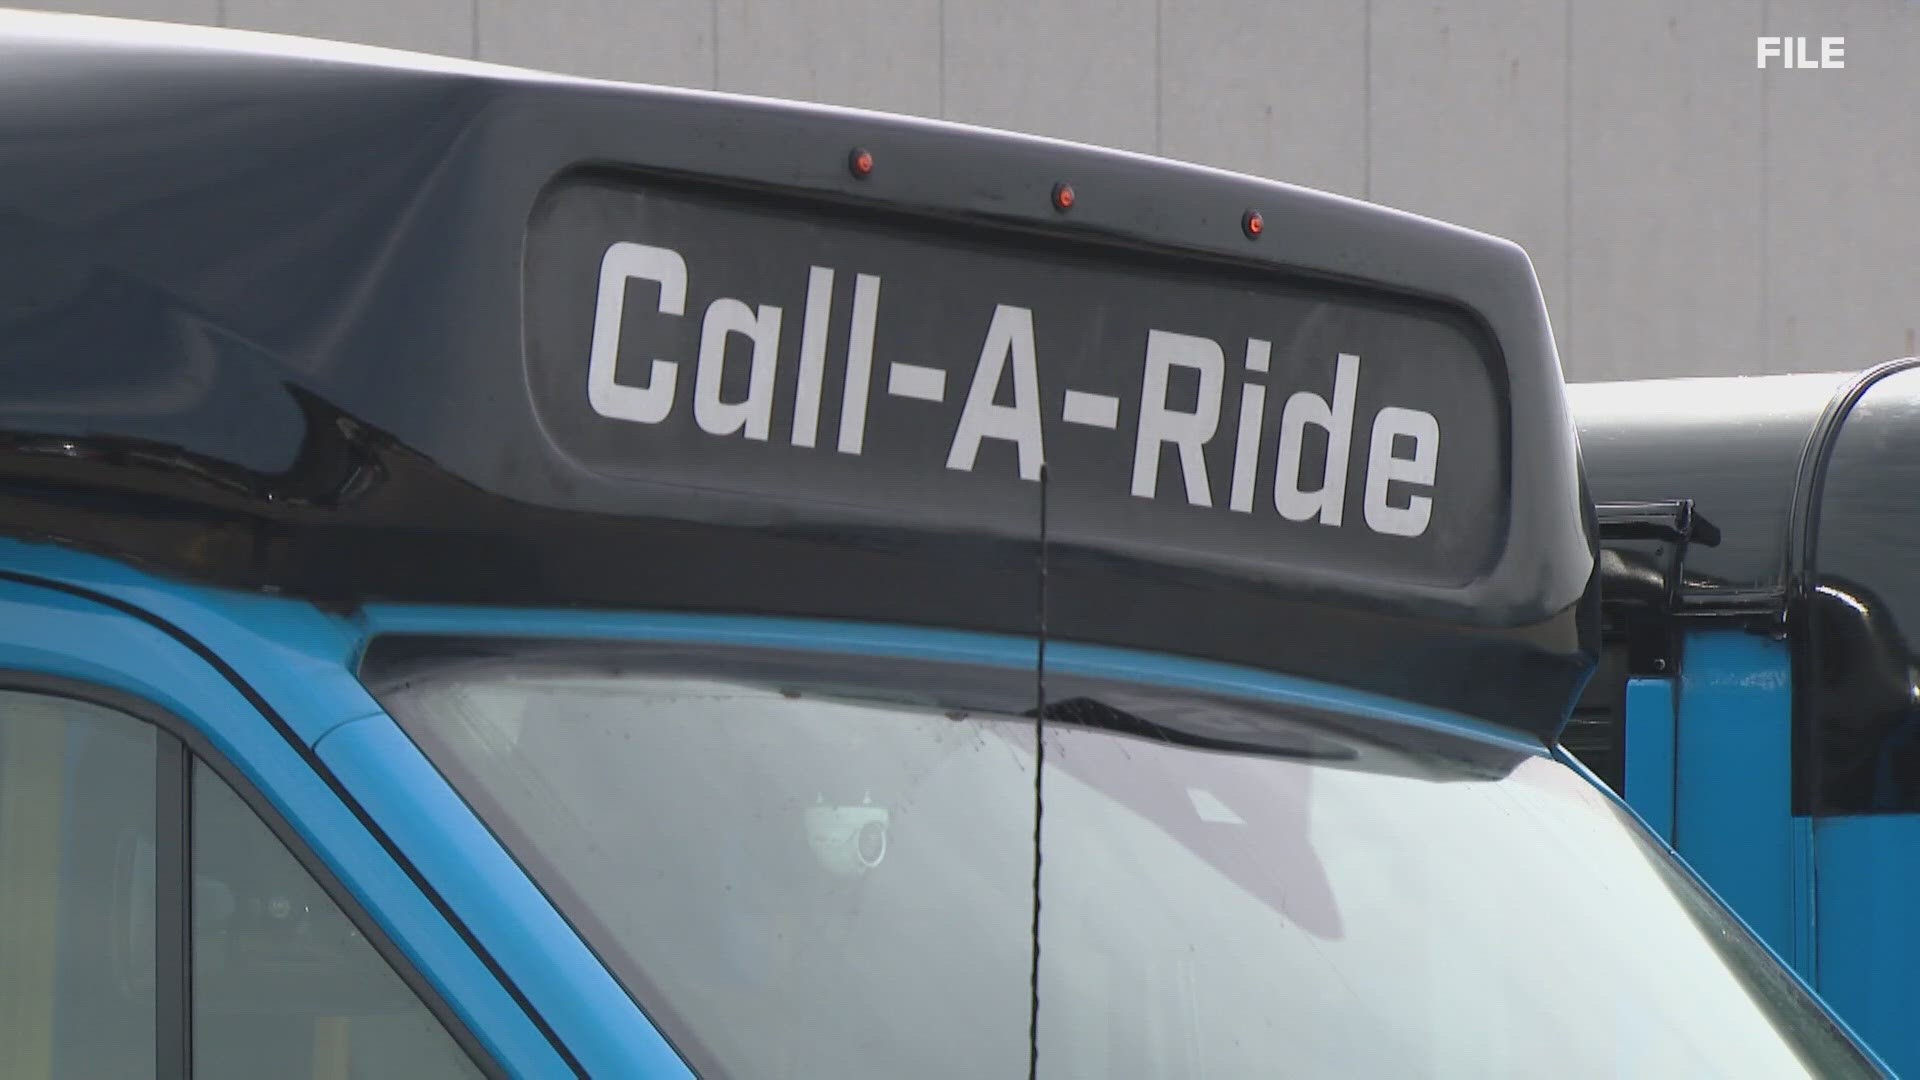 Bi-State's president said Call-A-Ride services would only be provided for life-critical appointments dialysis treatments.